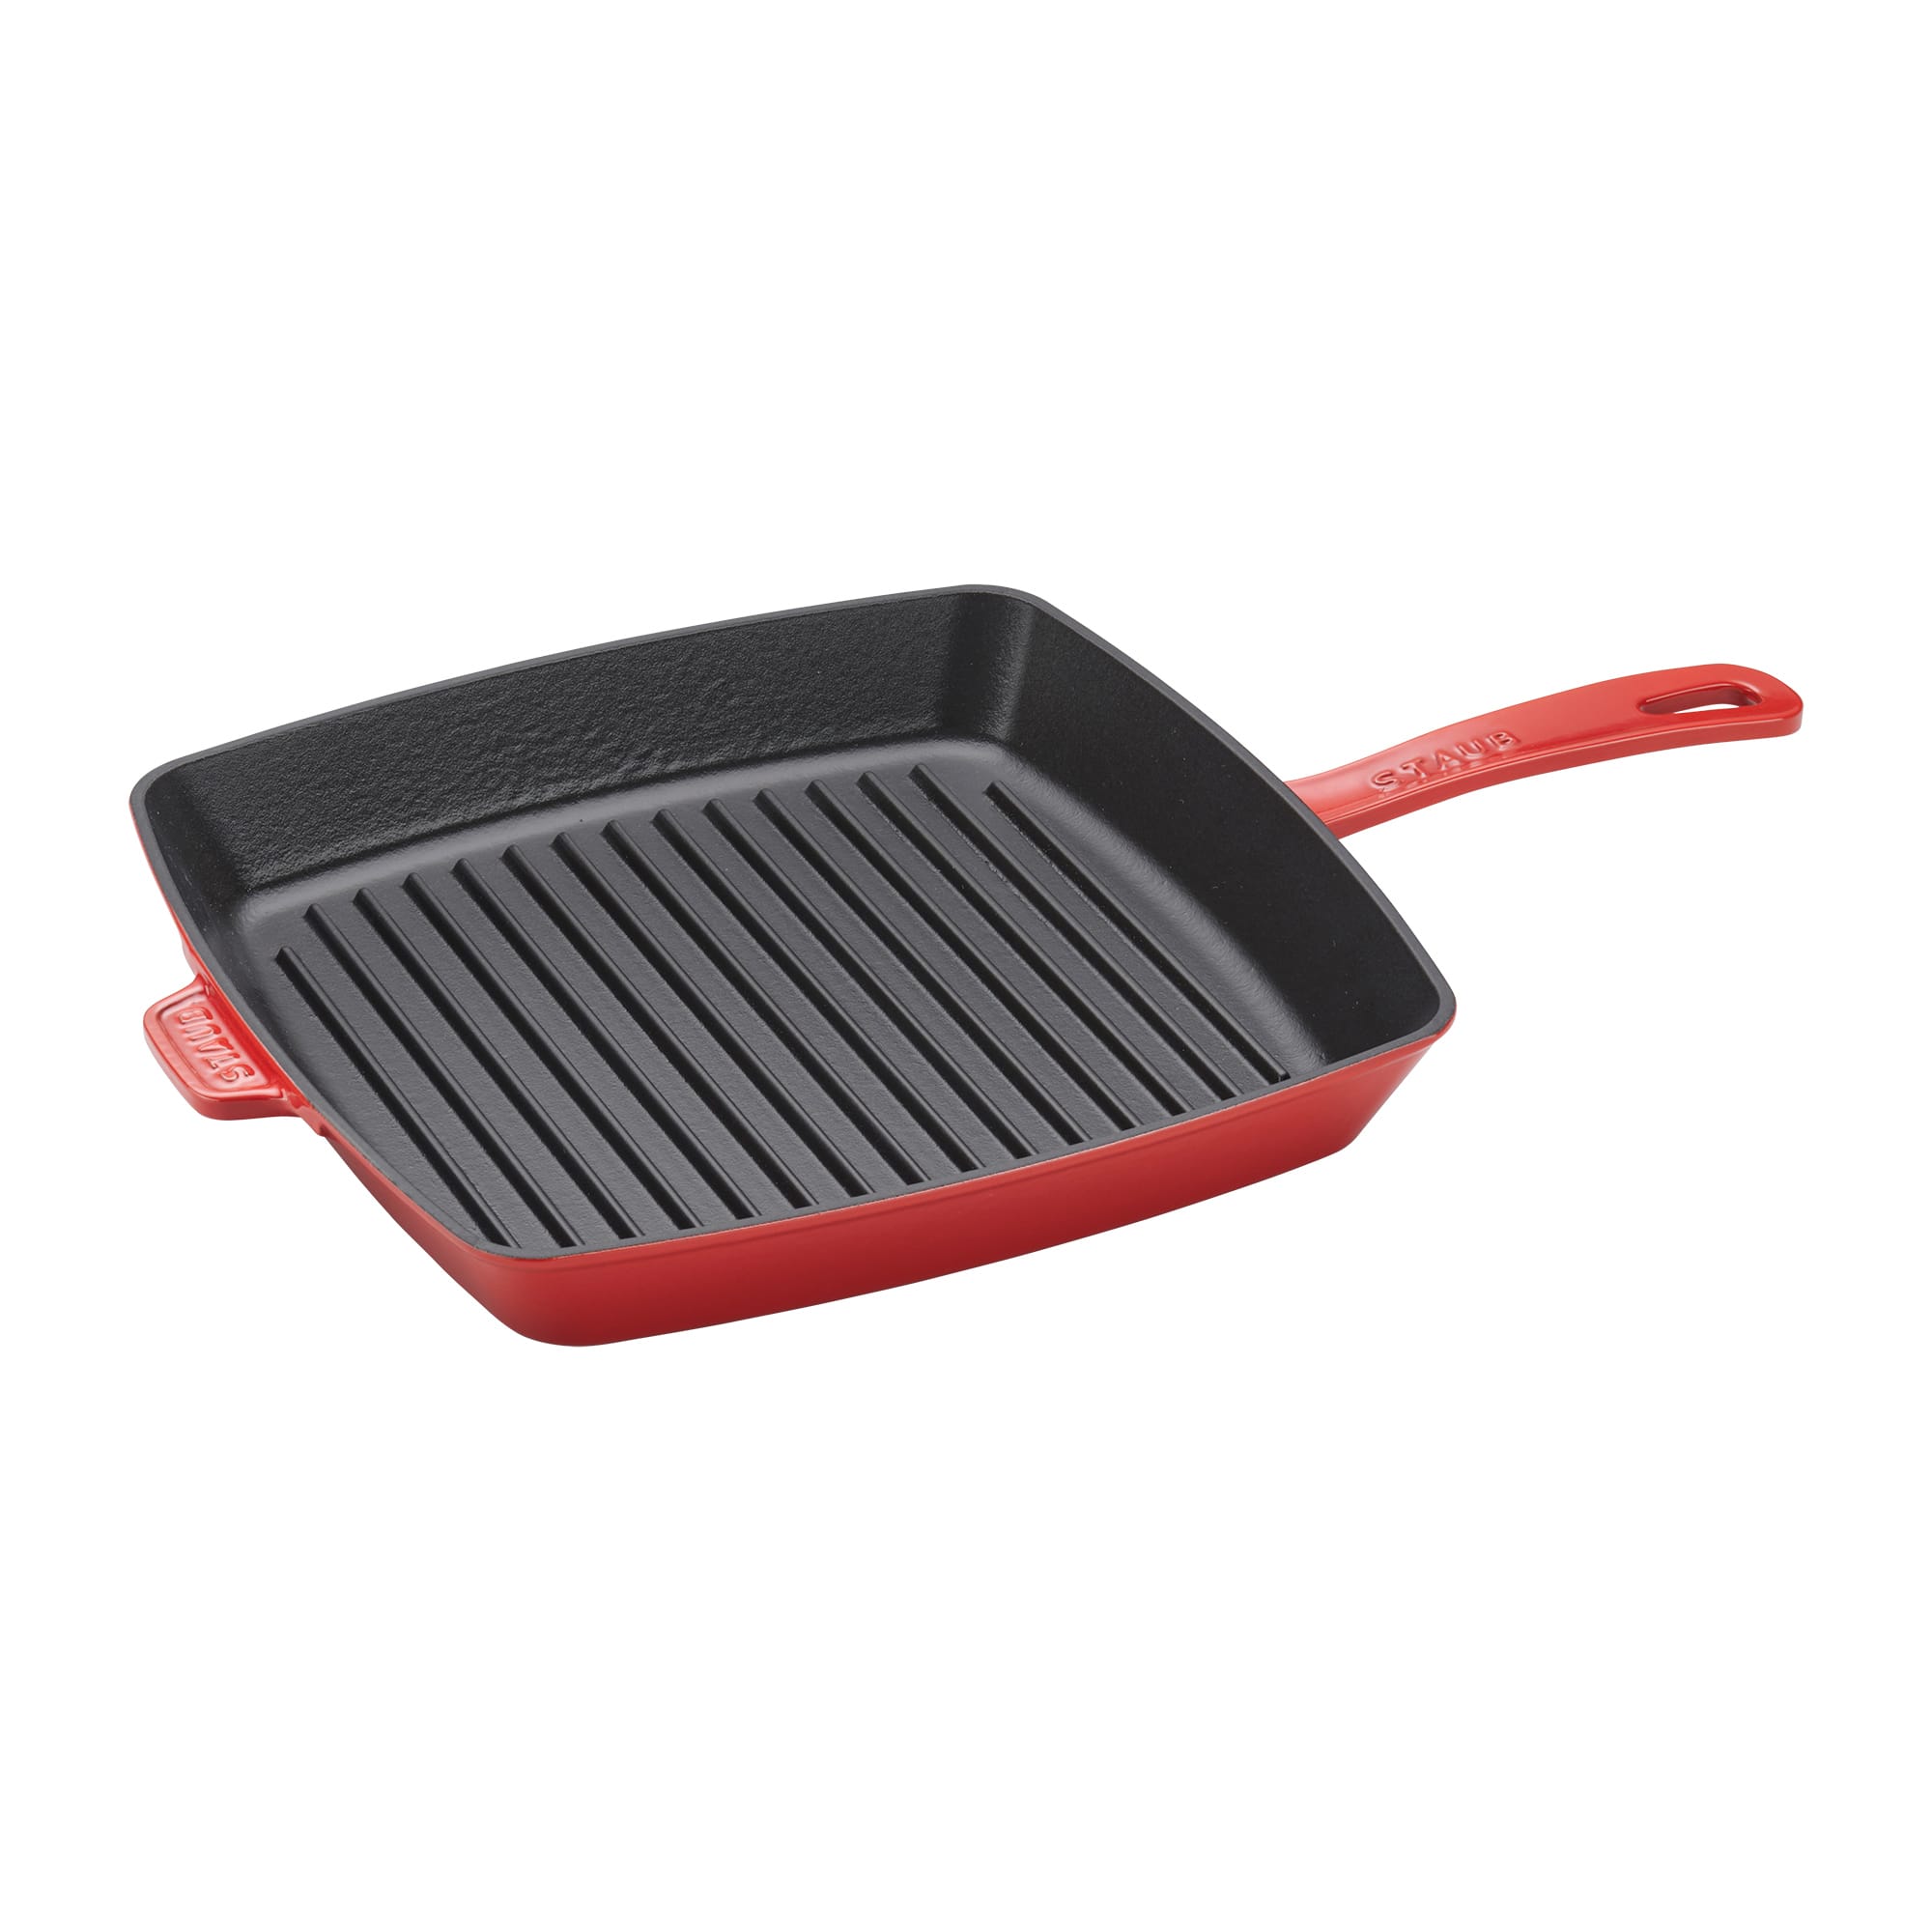 Staub Enameled Cast Iron 10 Round Double Handle Grill Pan 